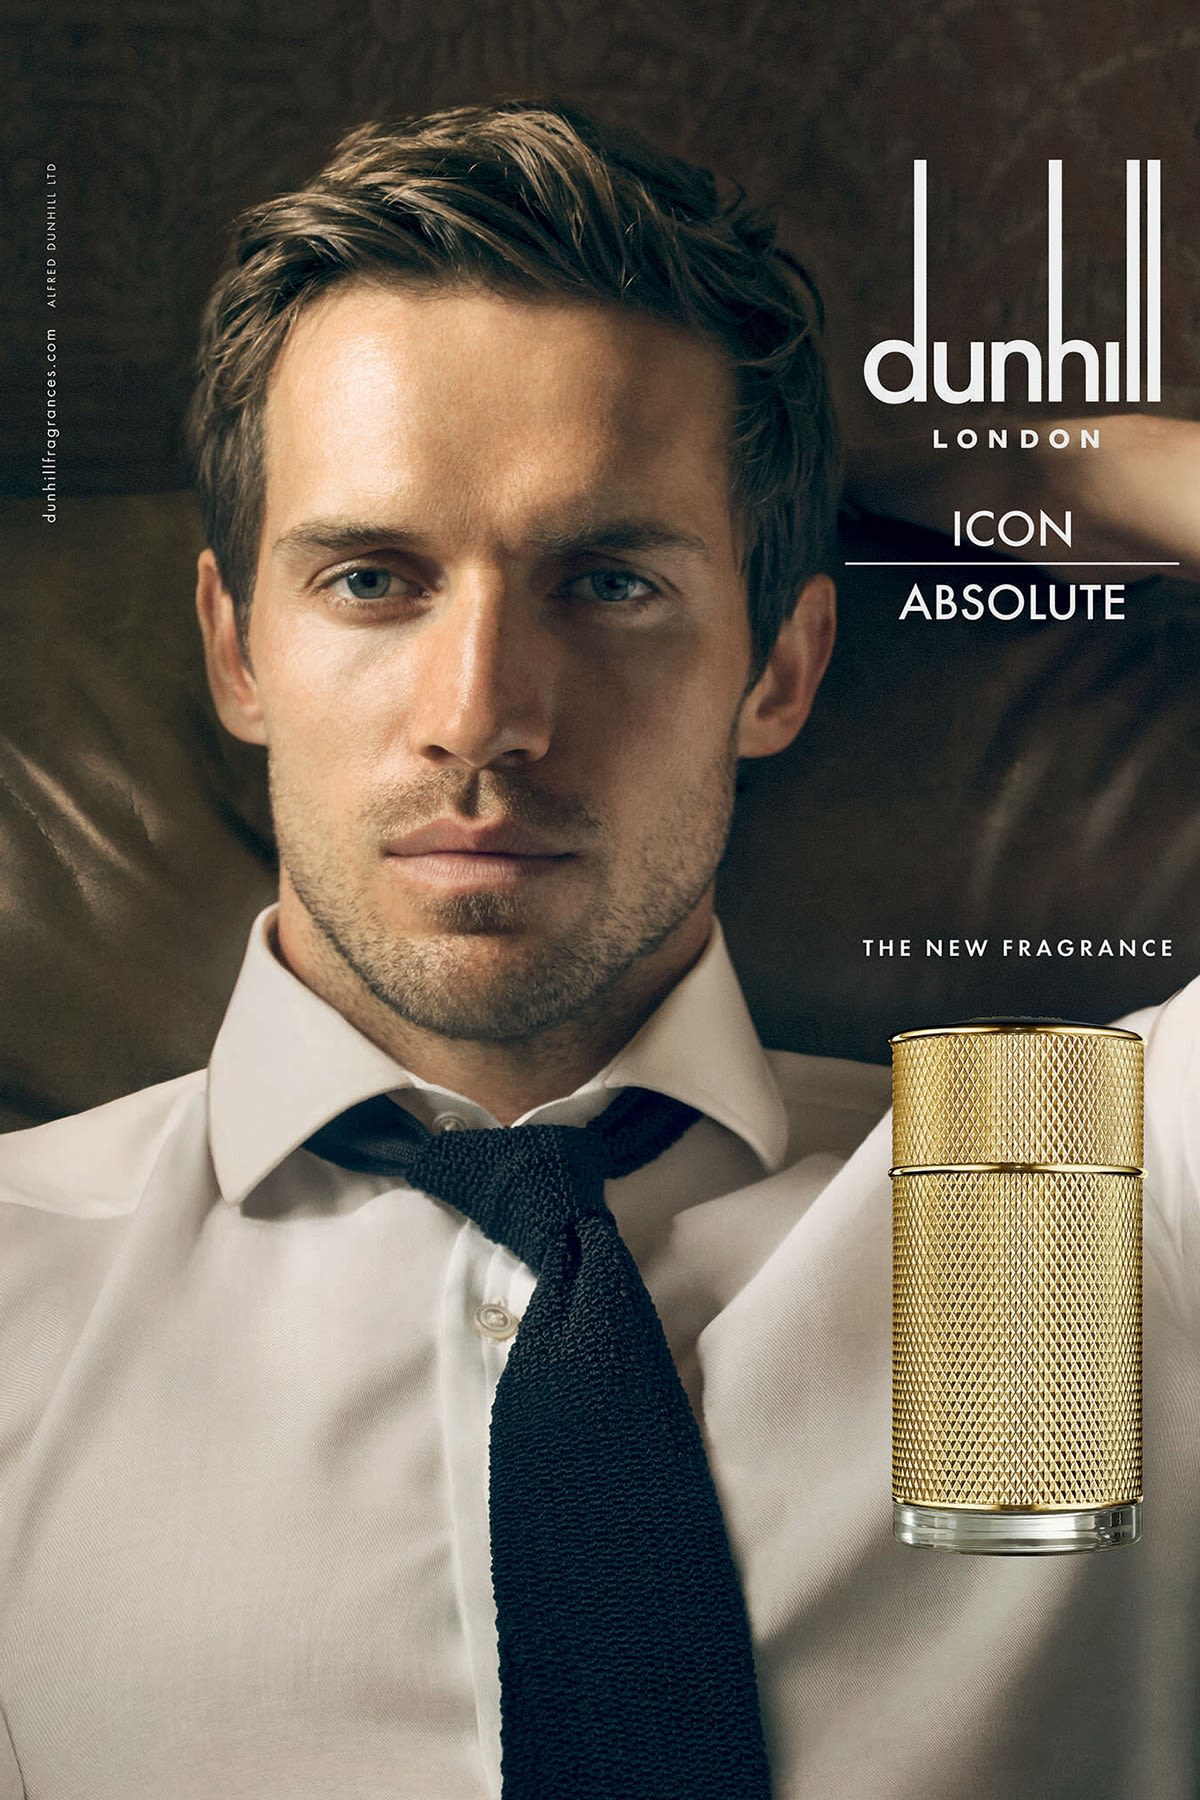 An Advert depicting a front on view of man wearing an unbuttoned white shirt with a loose tie. In the bottom right hand corner is a front view of a gold Dunhill Icon Absolute fragrance bottle. 